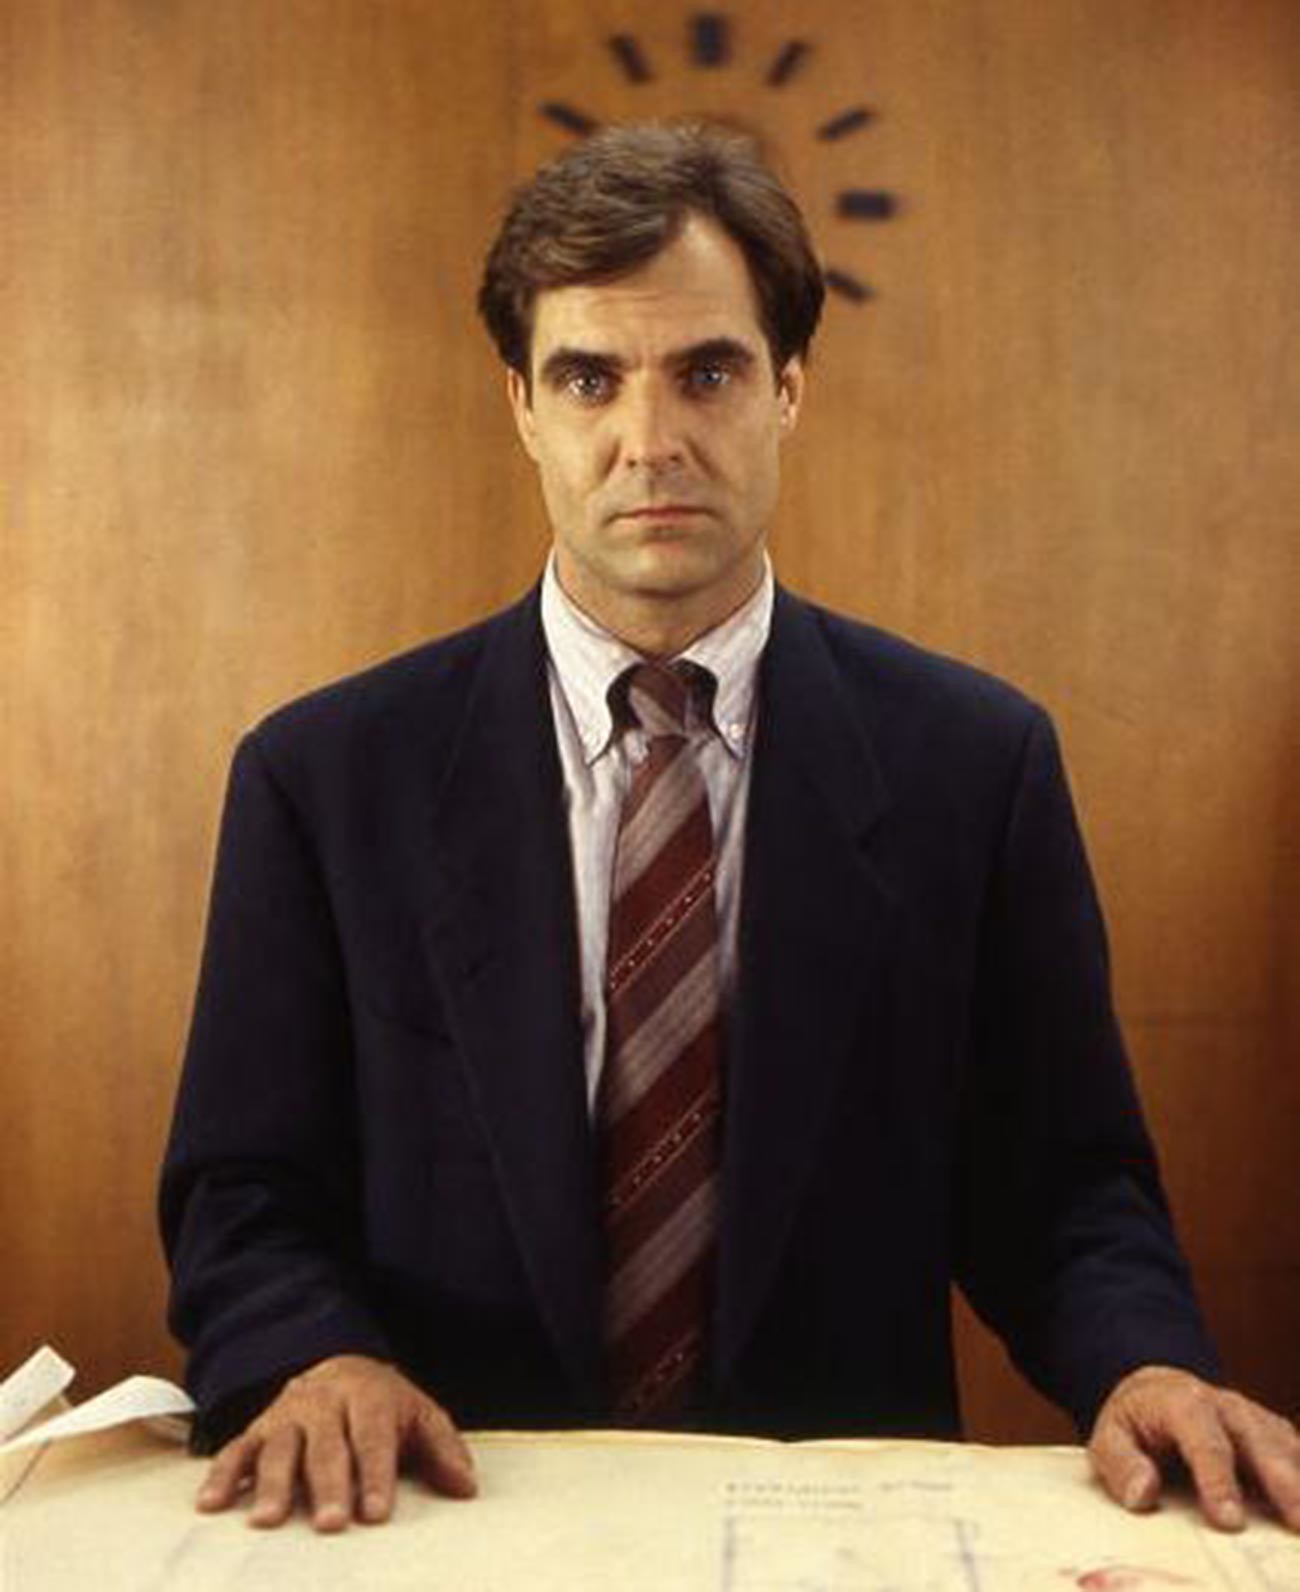 Henry Czerny in 'Notes from Underground'.